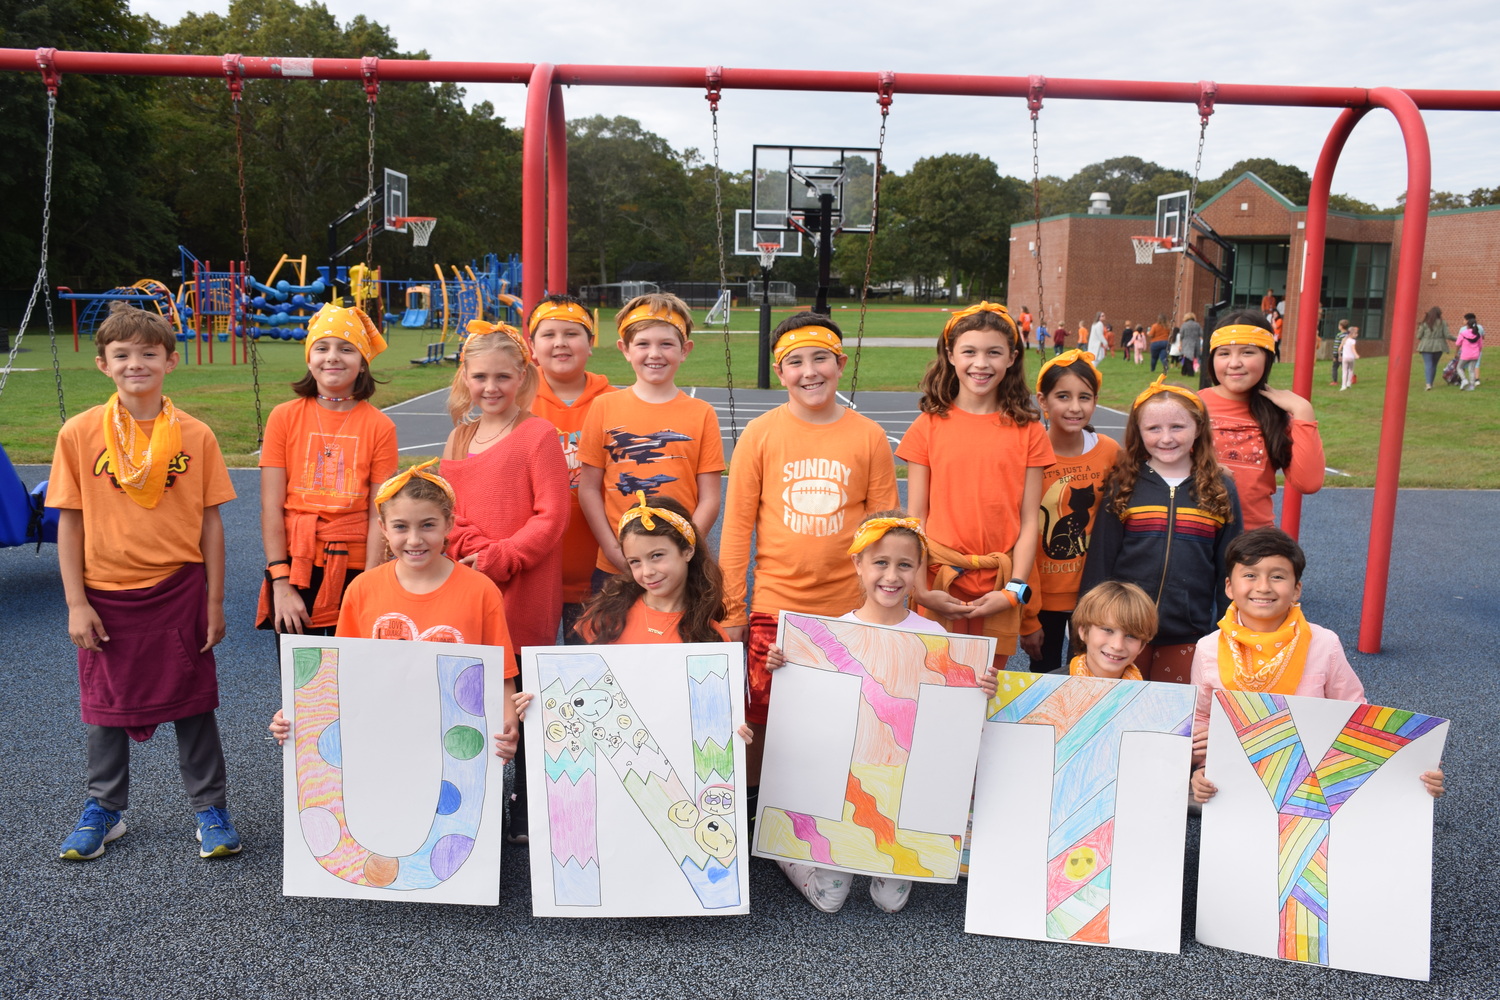 East Quogue students and faculty wore orange on October 18 to show unity for kindness, acceptance and inclusion, while also sending a visible and strong message that no child should ever experience bullying. The school also held its first whole-school meeting in the
amphitheater that was hosted and directed by fourth, fifth and sixth grade students who
encouraged peers to do one good thing for others during the school day. Additionally, select students were acknowledged with certificates for having demonstrated unity during the month of October and were applauded by their peers. COURTESY EAST QUOGUE SCHOOL DISTRICT